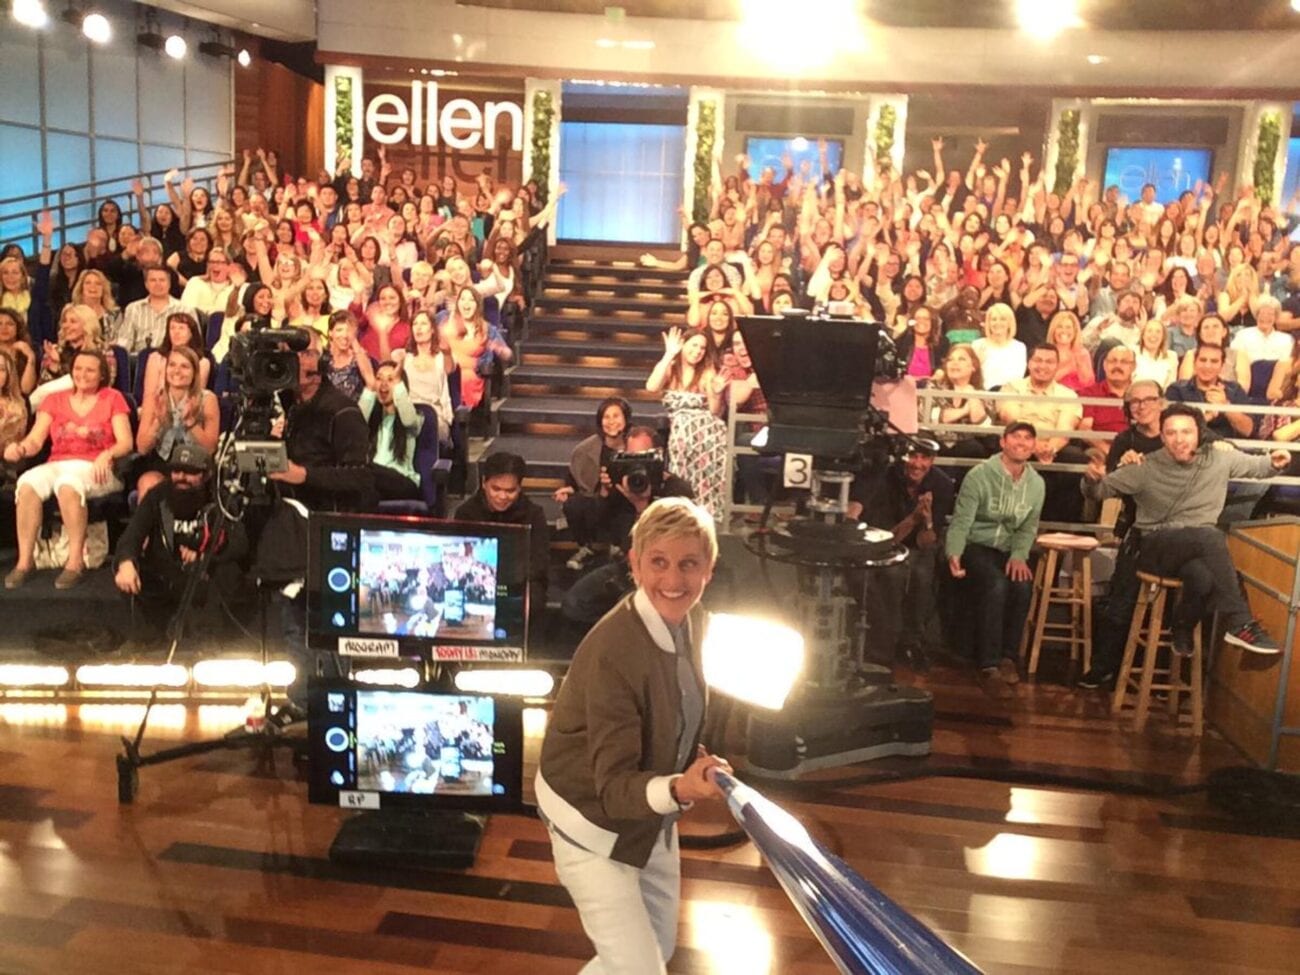 A lot of people think it’s all fun and games on 'The Ellen DeGeneres Show'. Here are the strict rules in place for audience members.